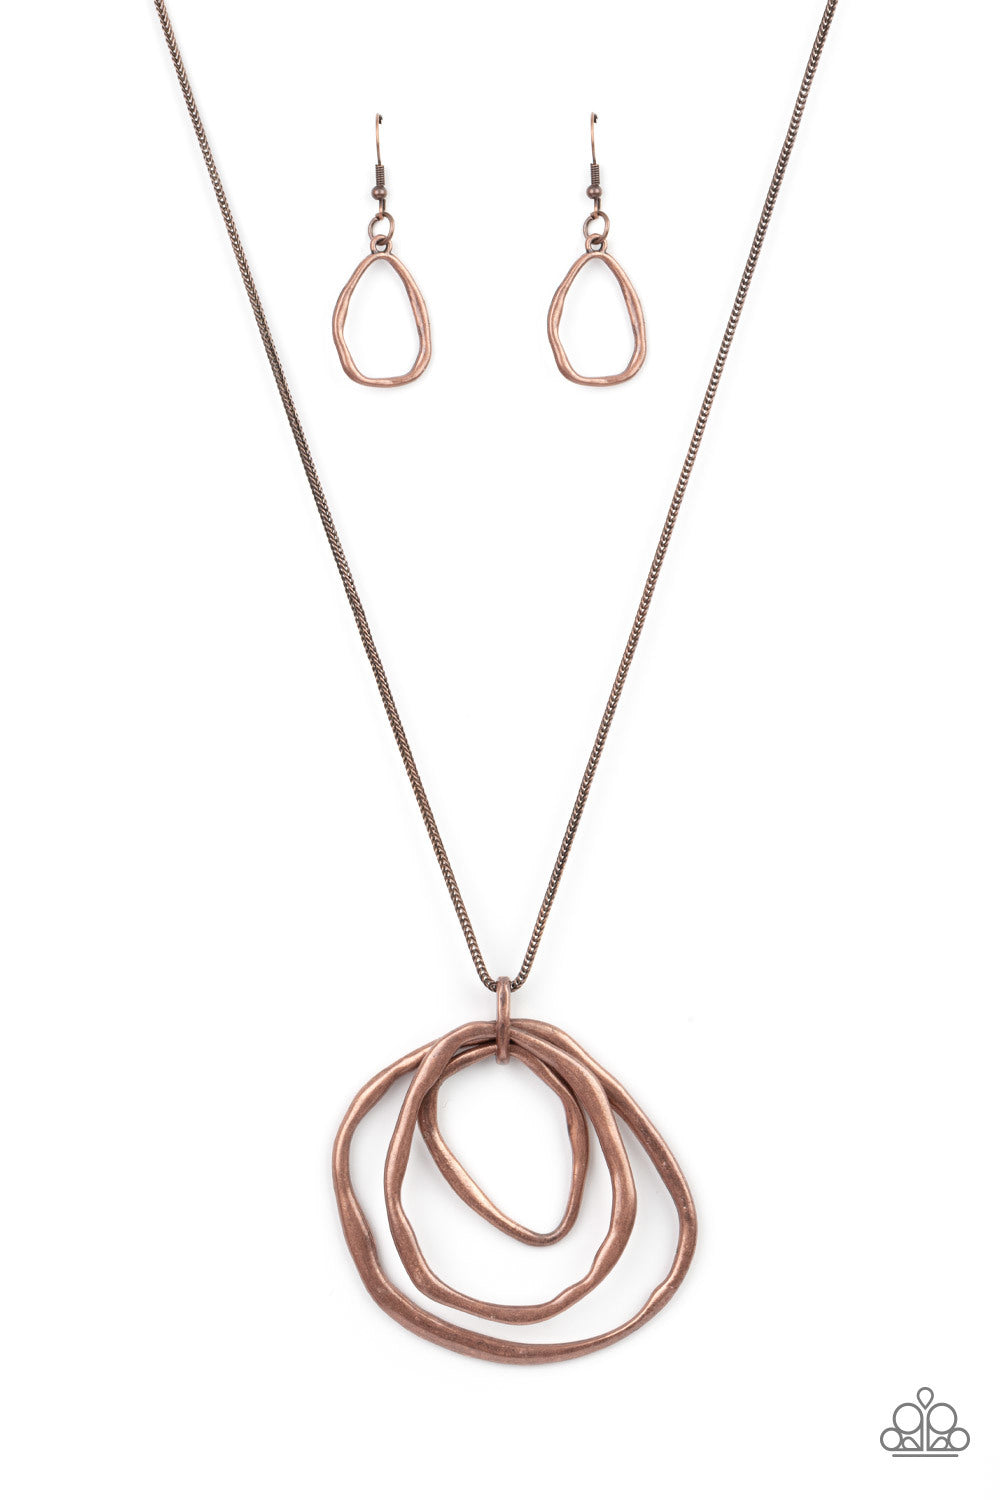 Revamped Relic - Copper Warped Circle Pendant Long Necklace